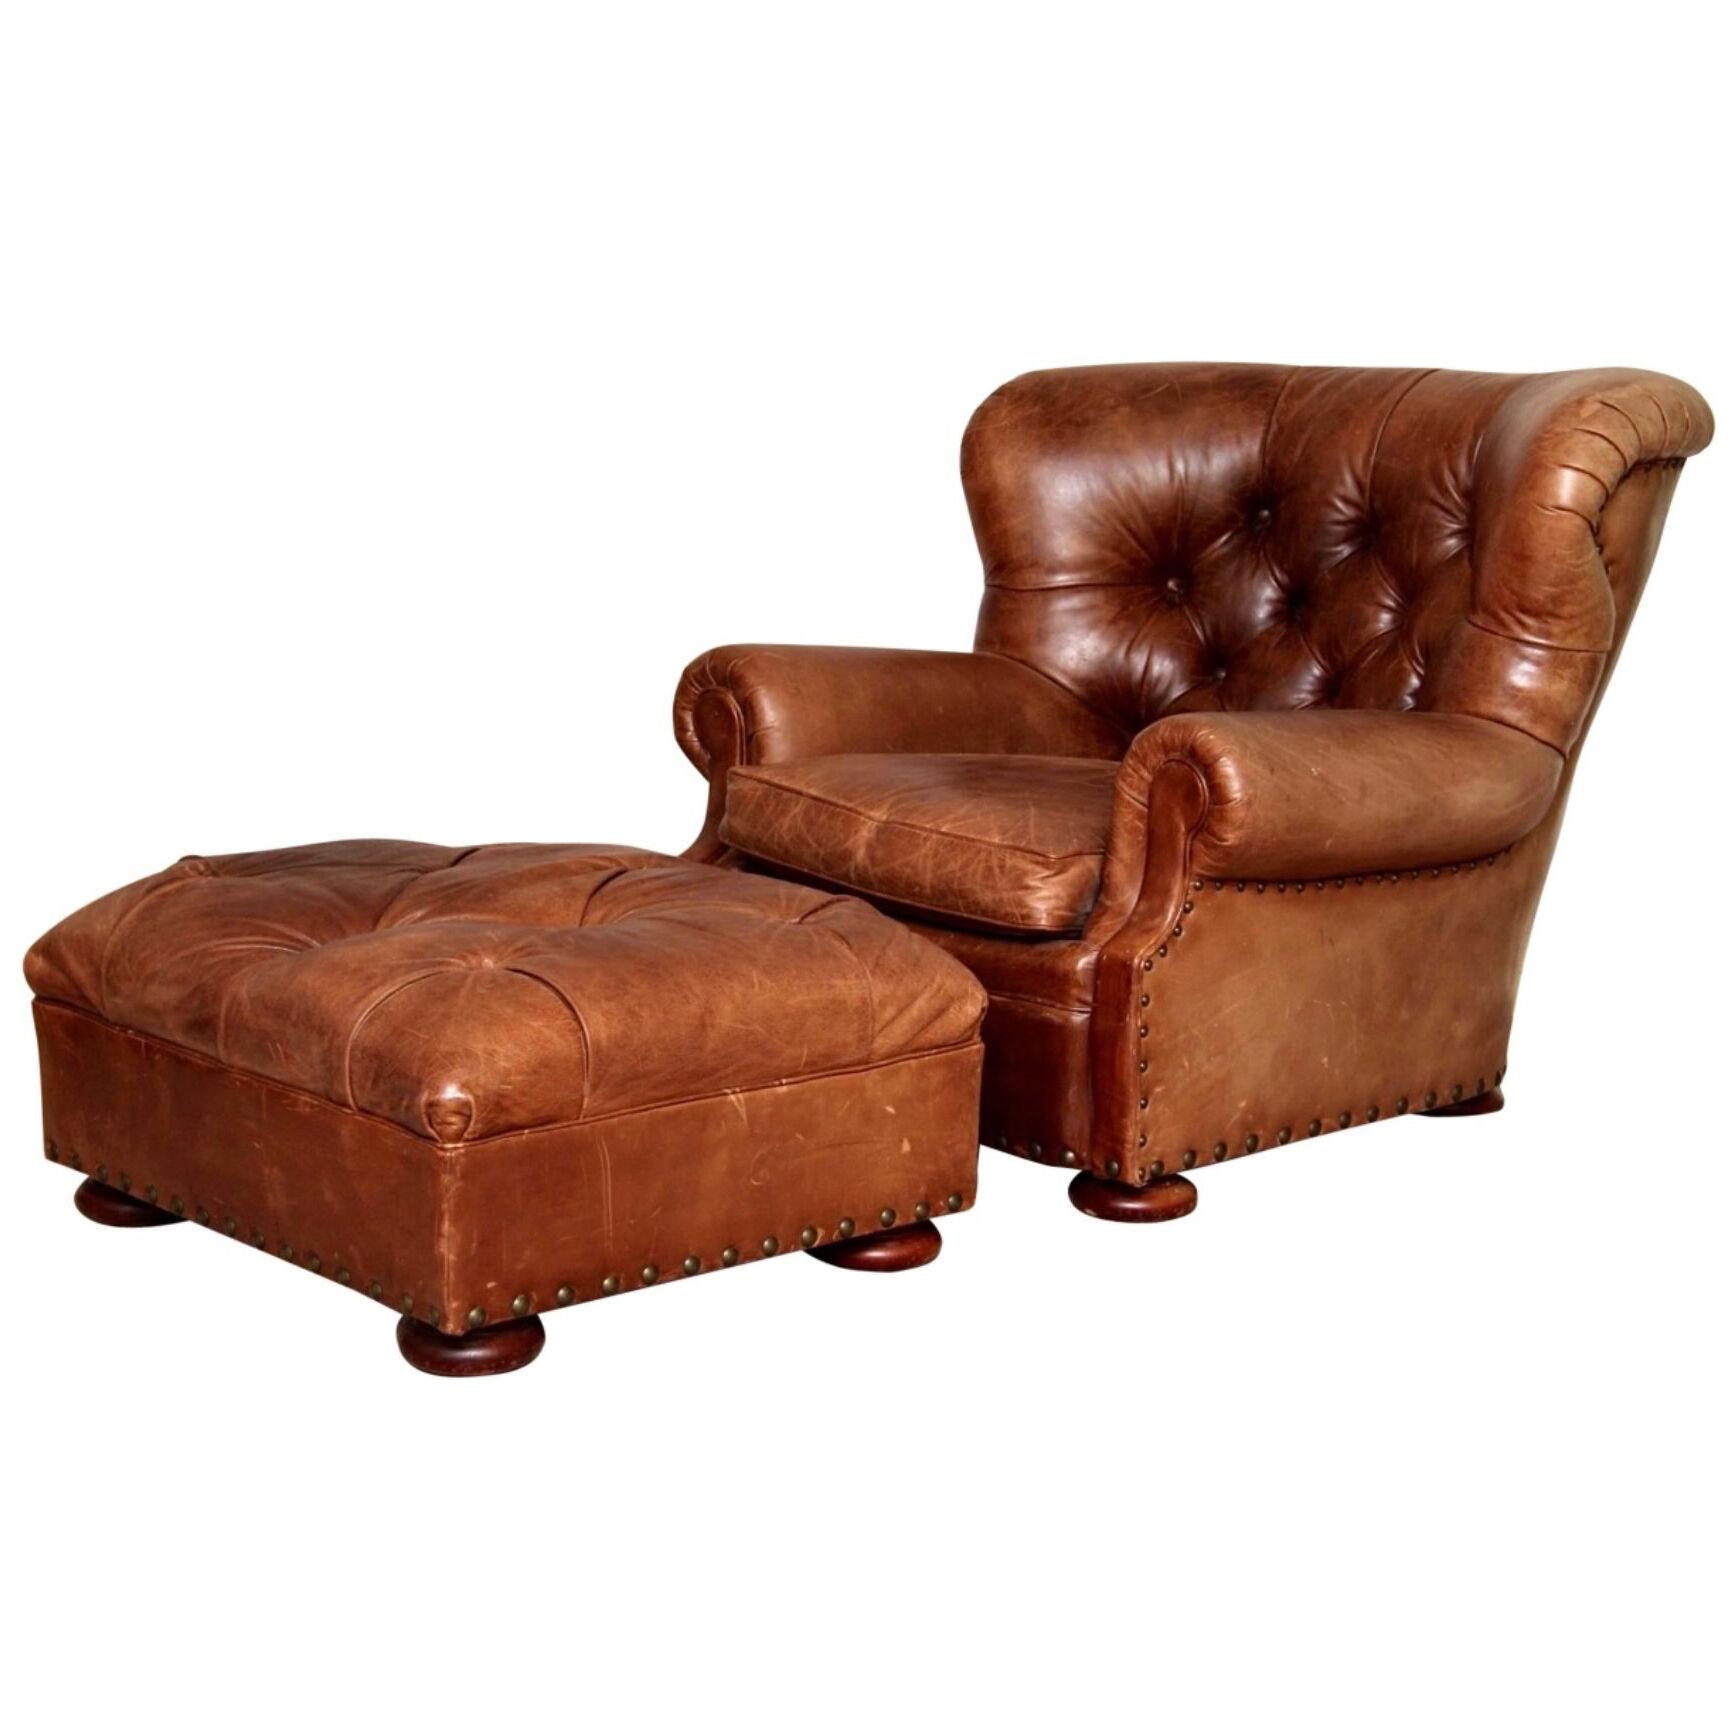 Henredon Brown Leather Writer's Lounge and Ottoman, Armchair, Iconic Club Chair